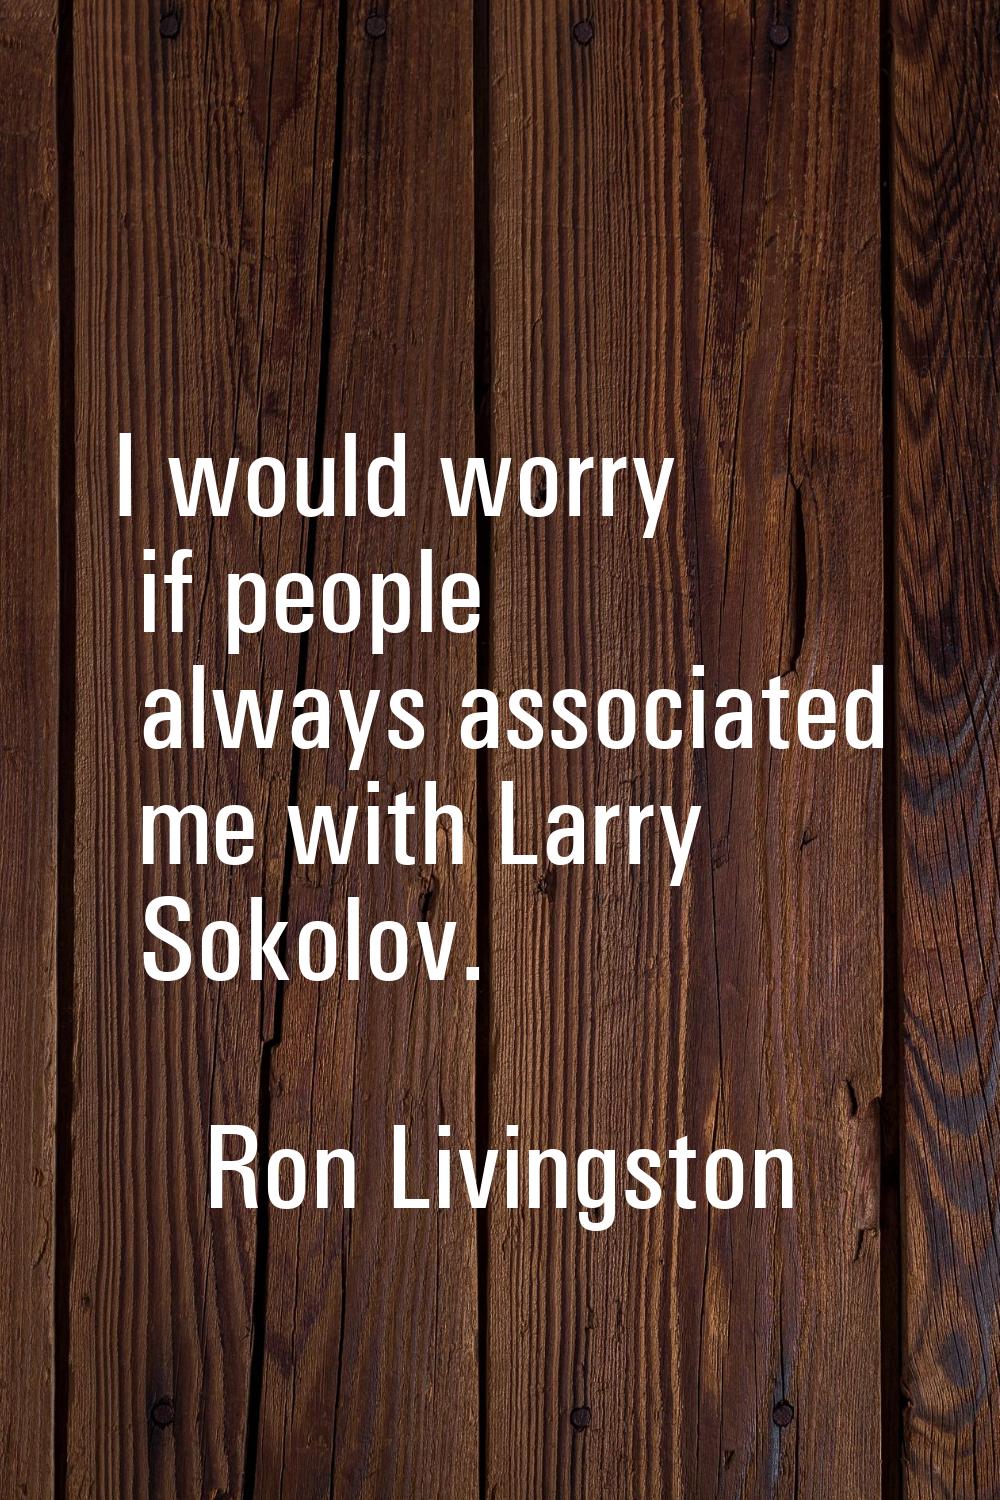 I would worry if people always associated me with Larry Sokolov.